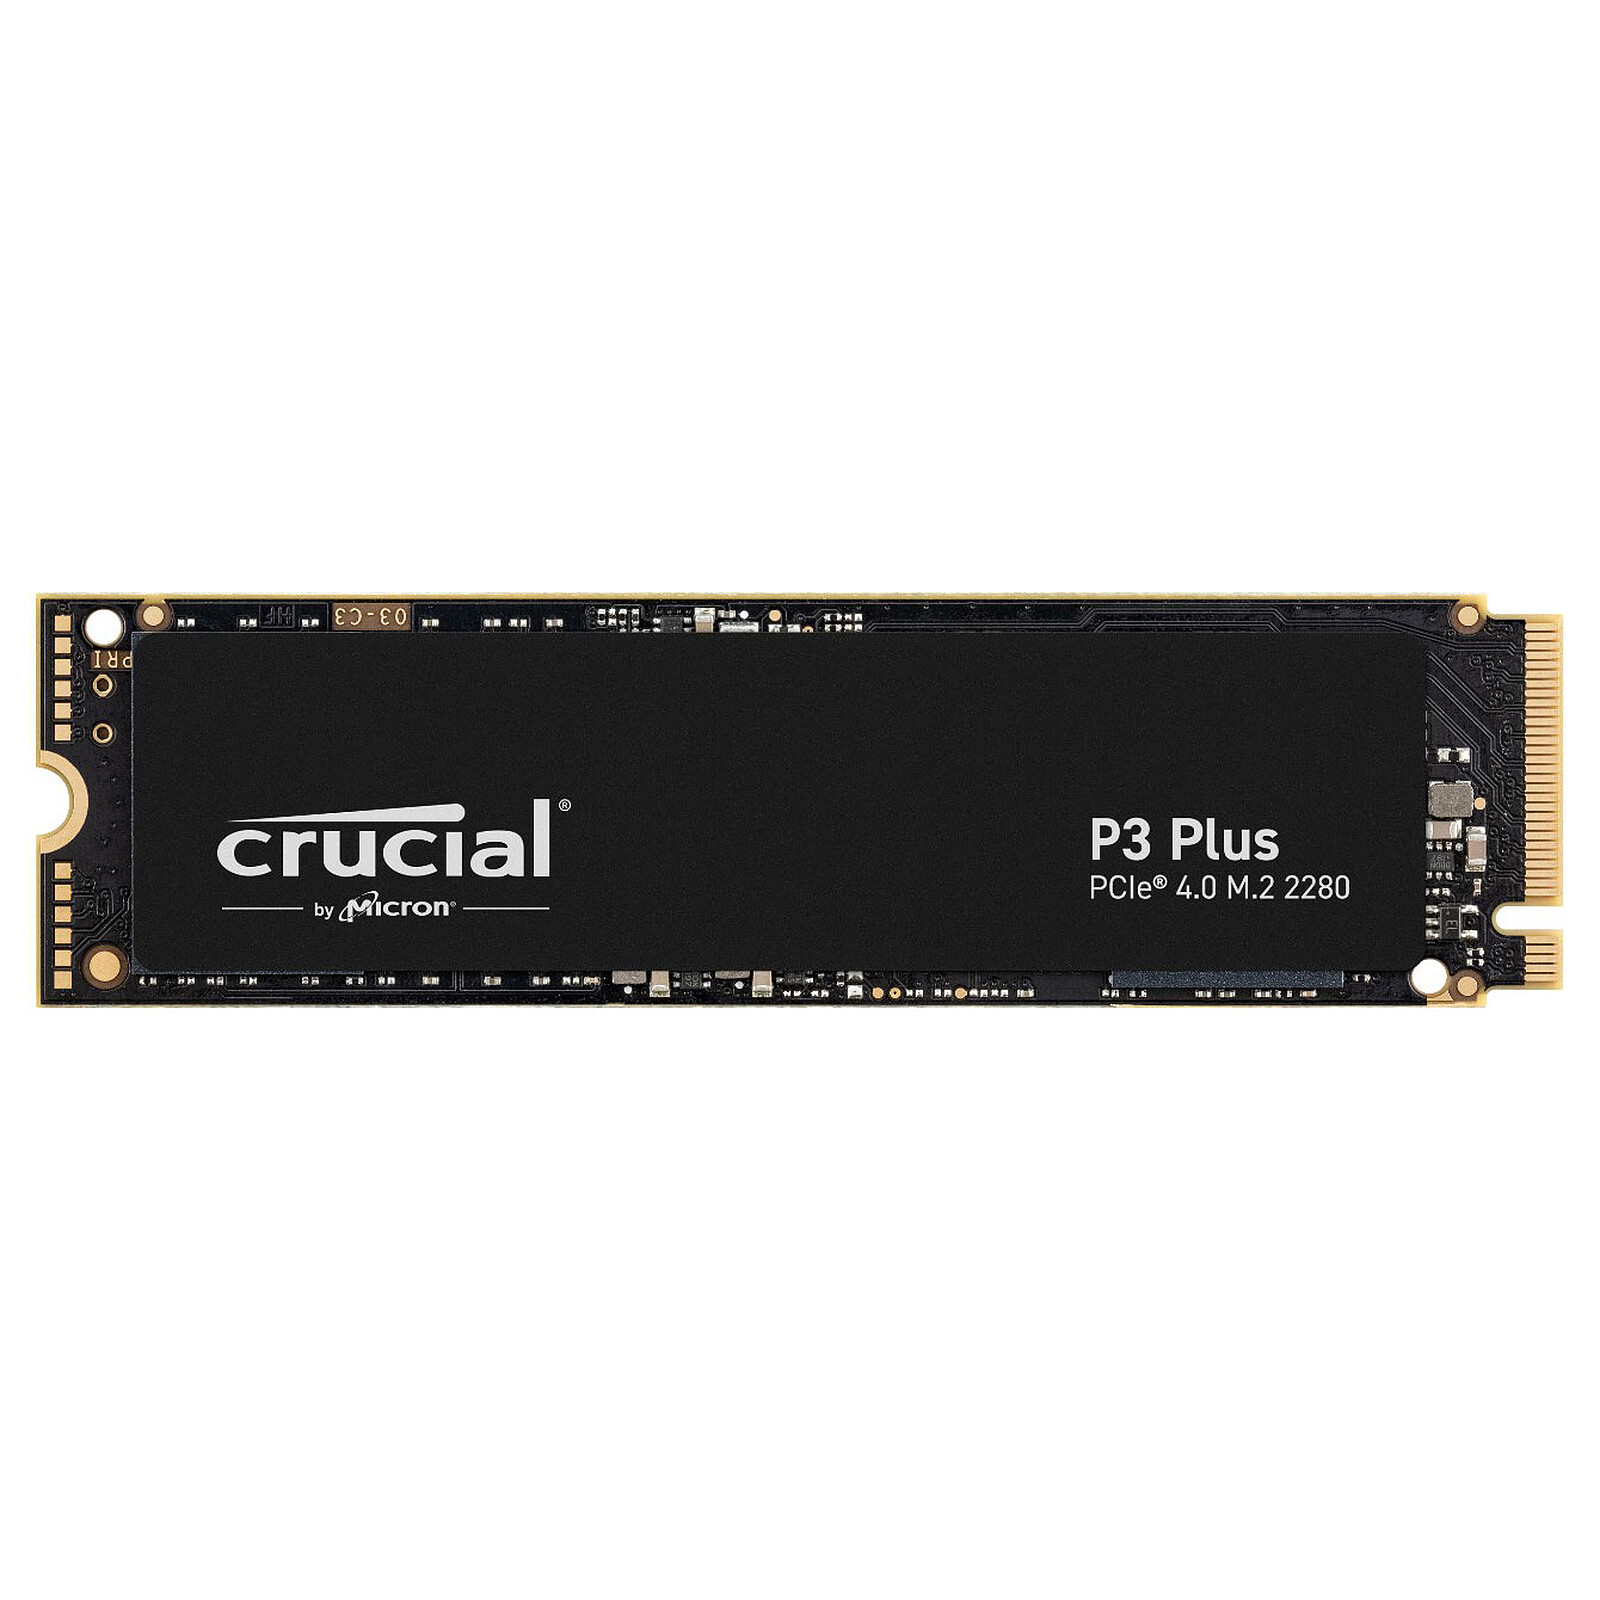 Crucial P3 Plus 1TB Review (Page 1 of 10)